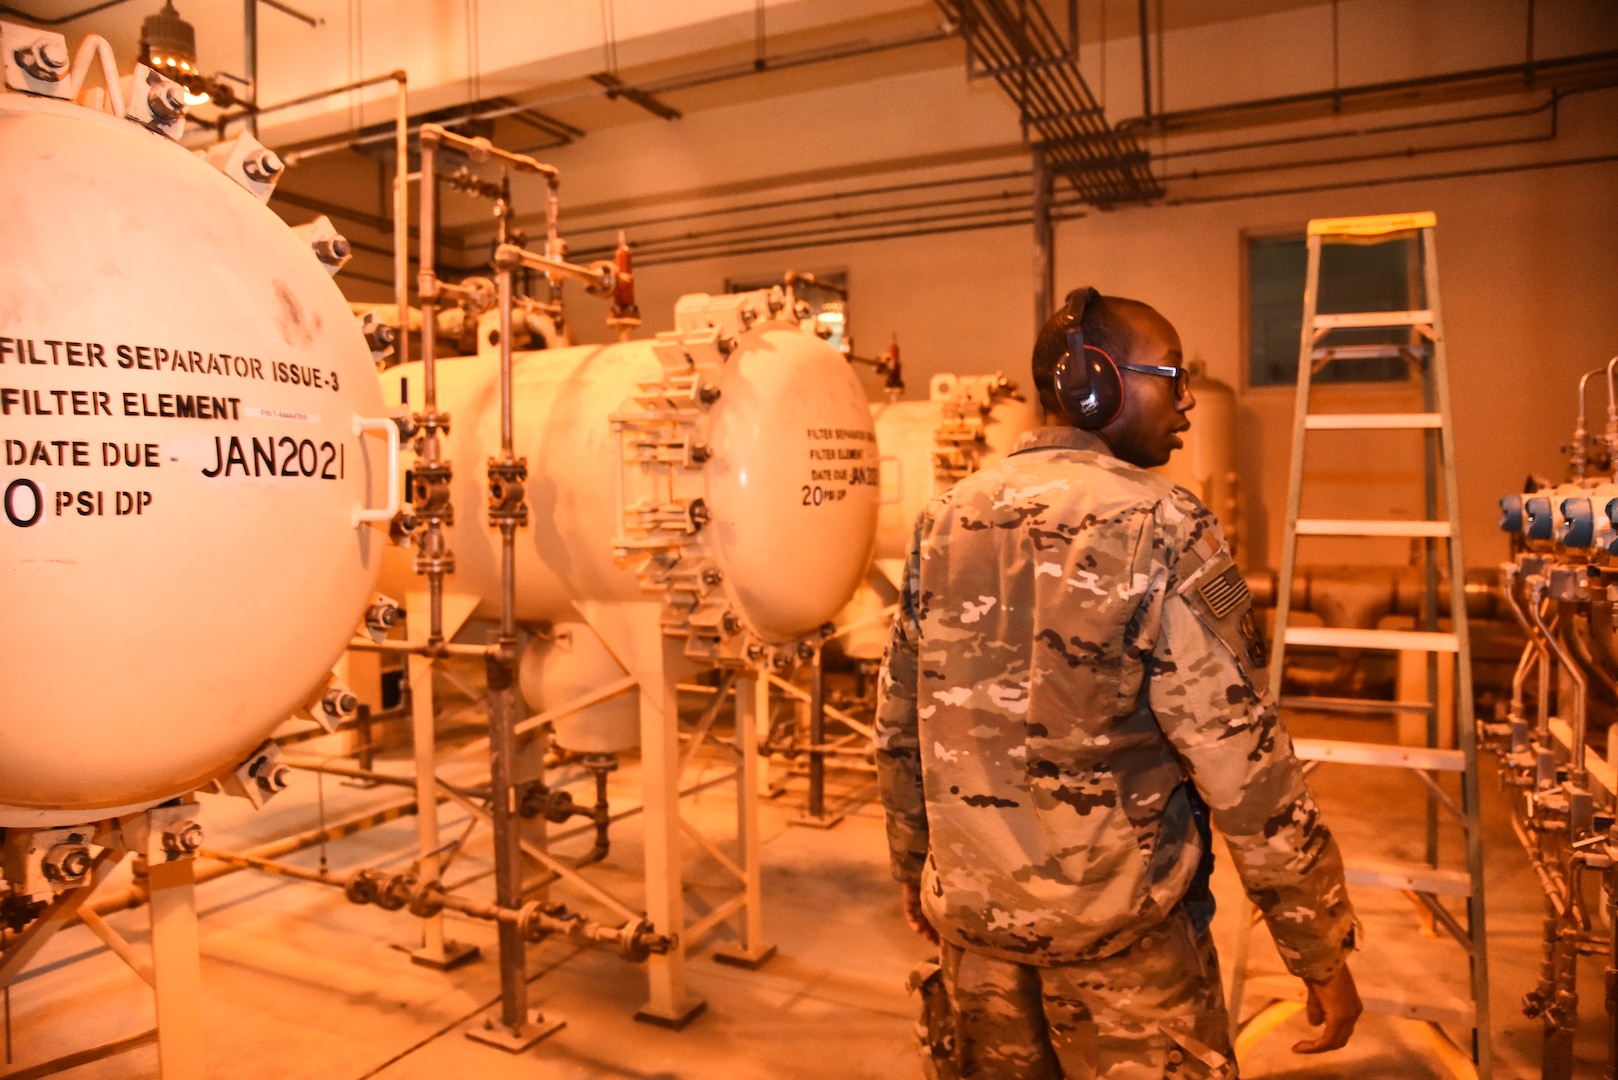 U.S. Air Force Senior Airman Melvin Tucker, 380th Expeditionary Logistics Readiness Squadron fuels storage technician, inspects Bubba, a Type-3 hydrant system, at Al Dhafra Air Base, United Arab Emirates, Jan. 21, 2019. Tucker is one of the many Airmen responsible for operating the hydrant system that monitors and controls the fuel from the storage tanks all the way to the flight line and into the aircraft. (U.S. Air Force photo by Senior Airman Mya M. Crosby)